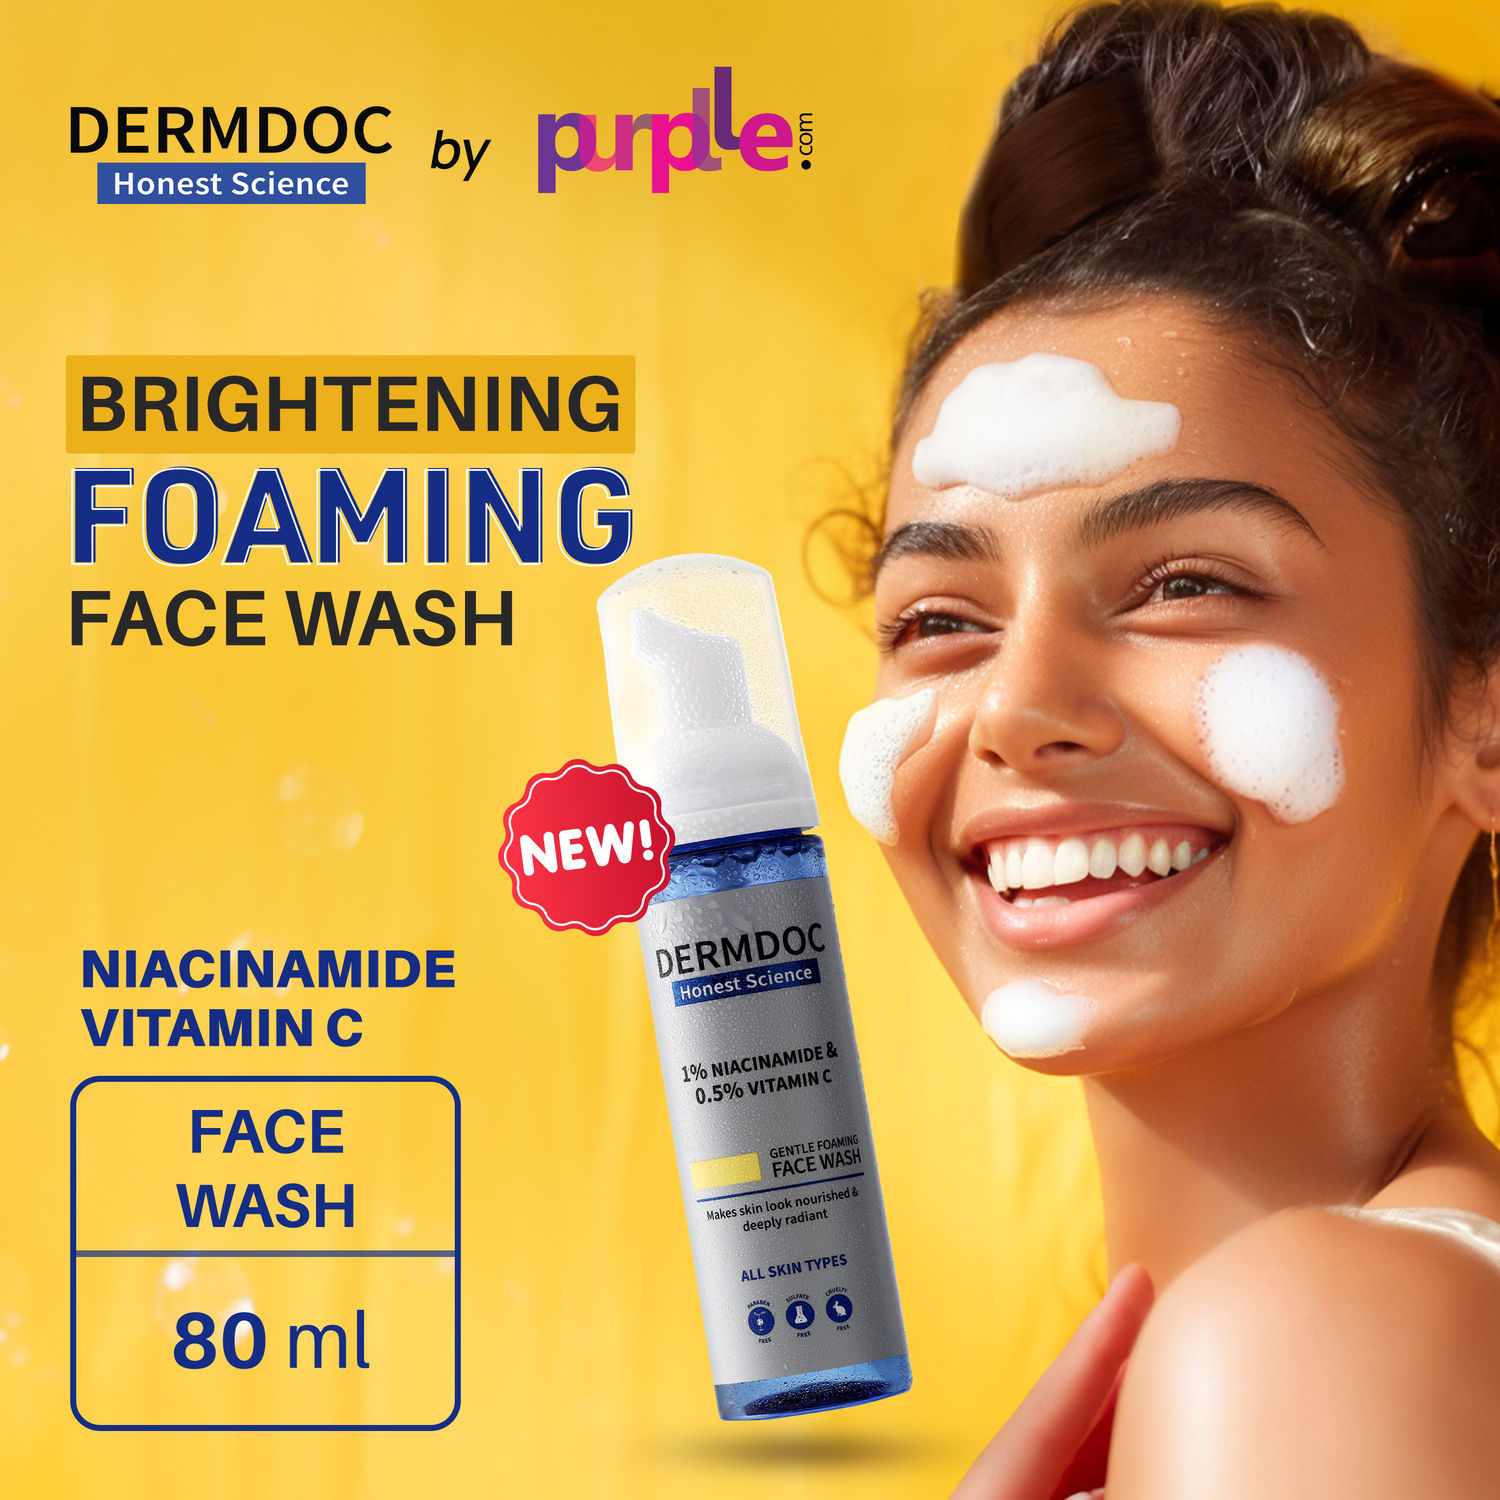 Buy DERMDOC by Purplle 1% Niacinamide & 0.5% Vitamin C Gentle Foaming Face Wash (80 ml) | best face wash for clear & glowing skin | brightening face wash | foaming cleanser - Purplle